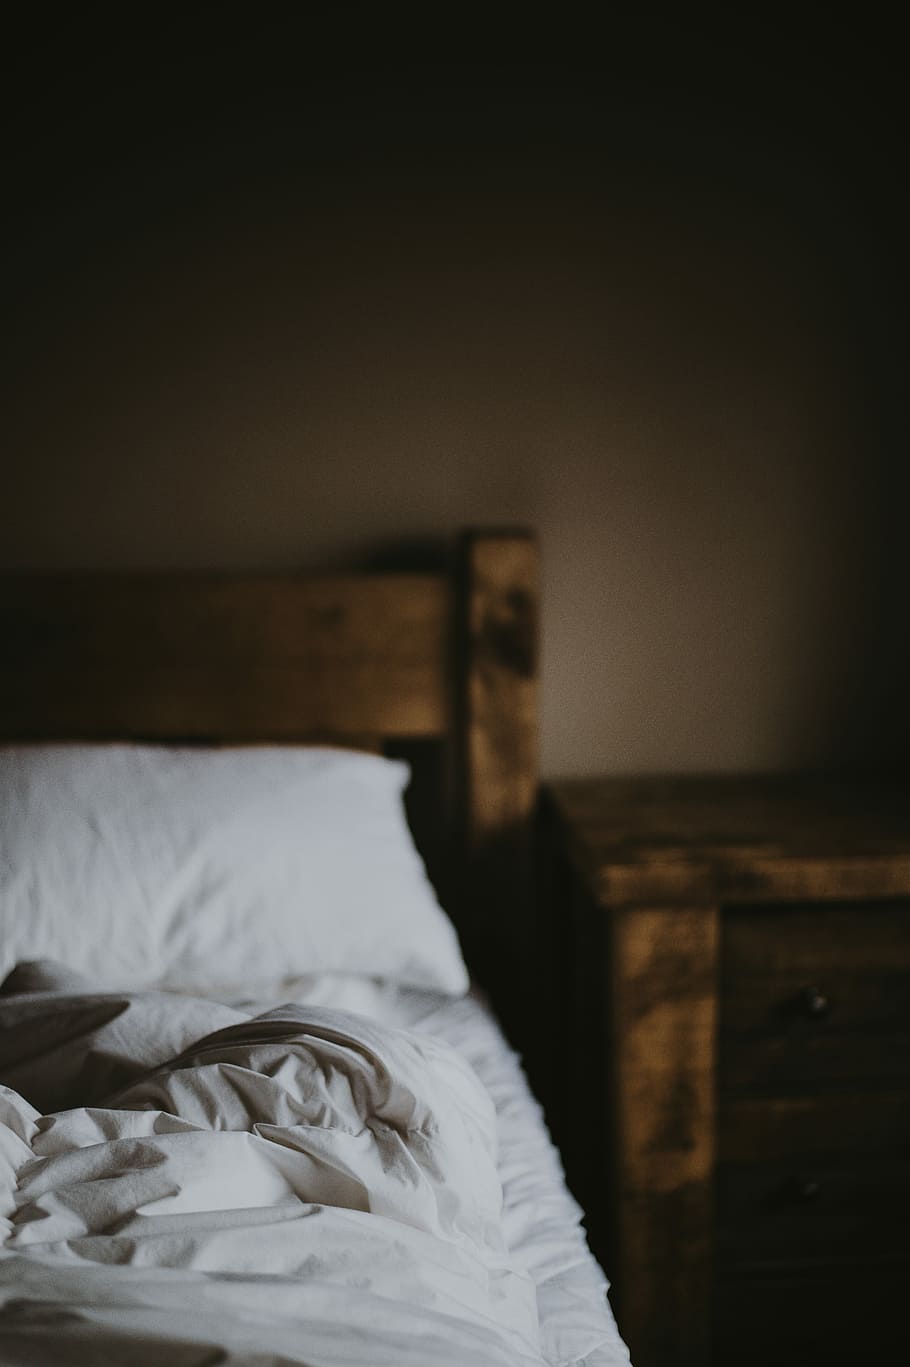 white cushion on bed near brown wooden nightstand, selective focus photography of white bed comforter